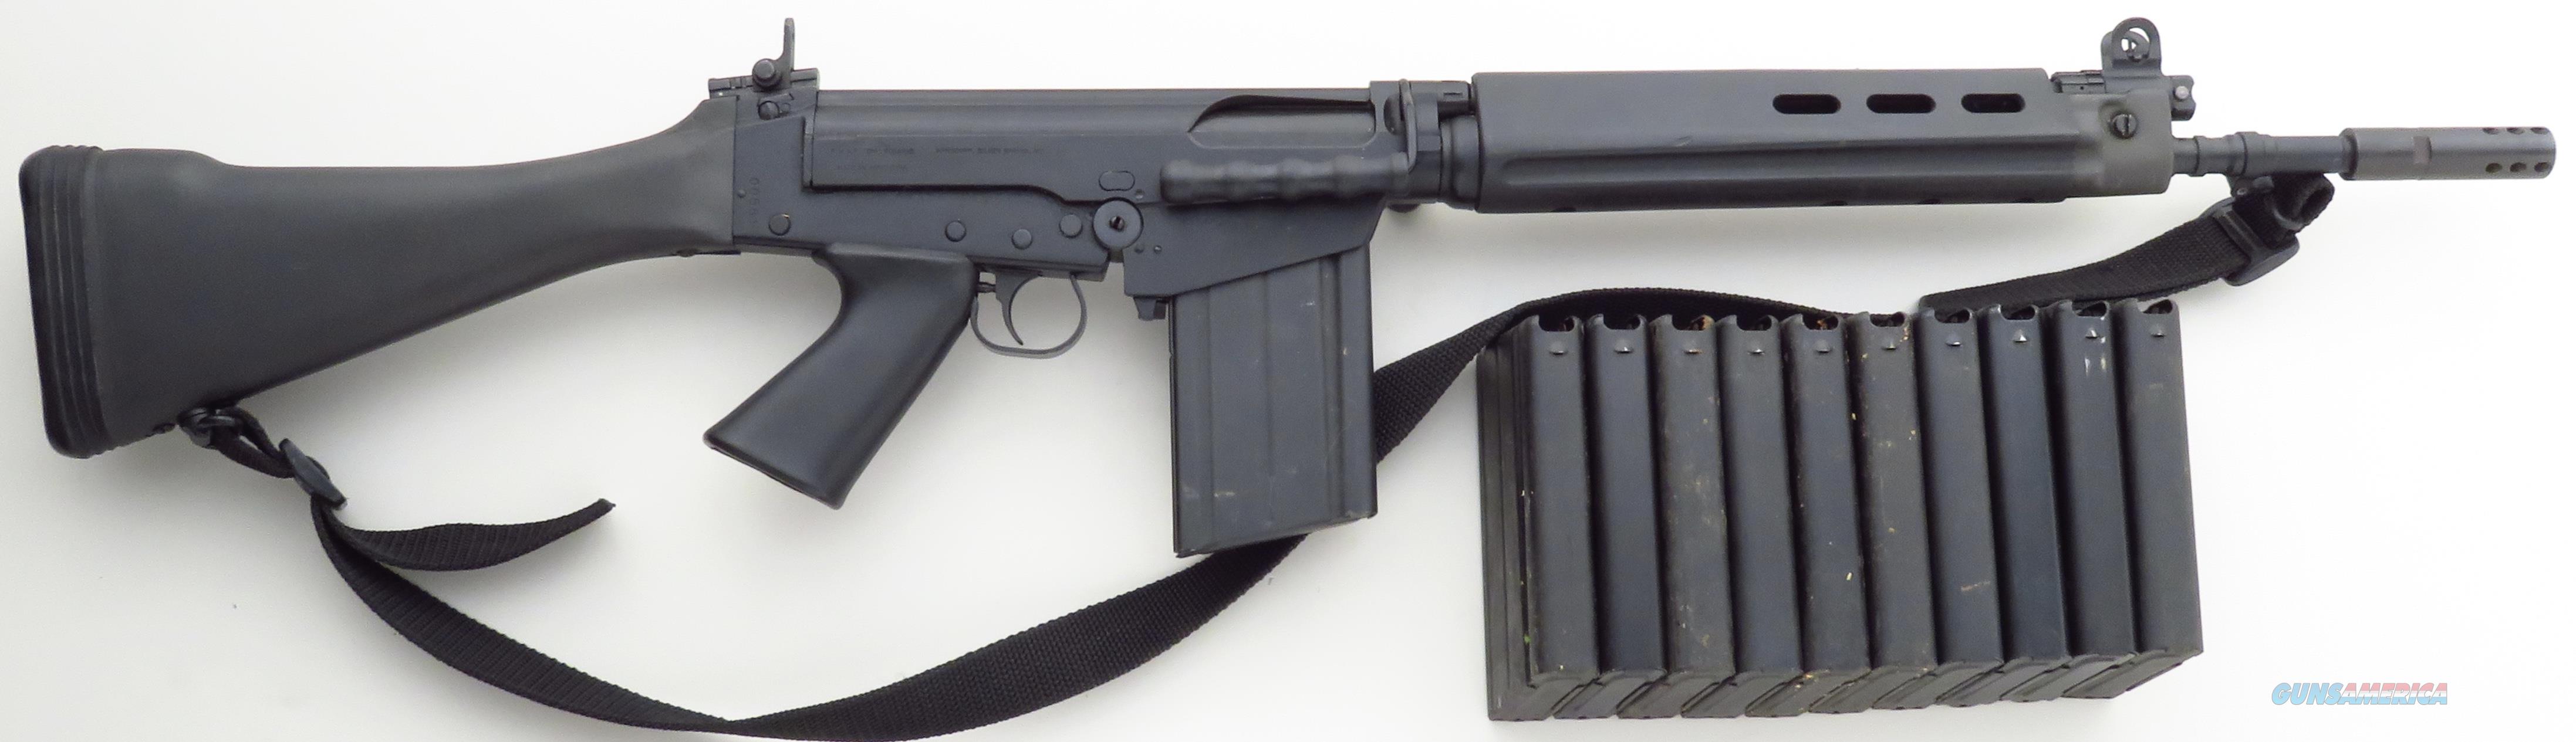 century arms fn fal clone